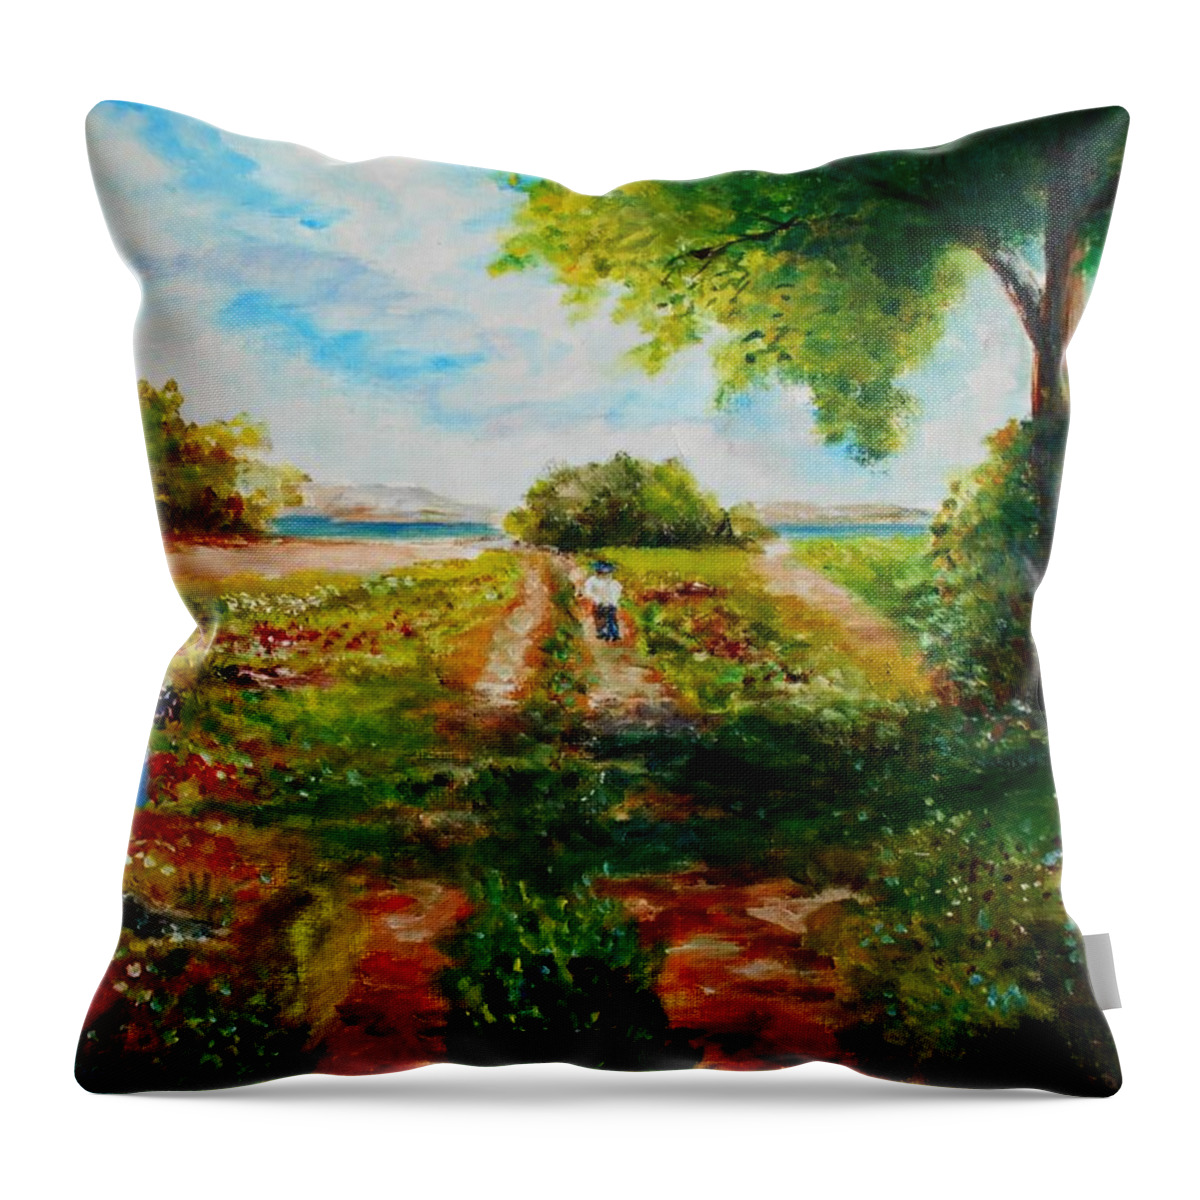 Landscapes Throw Pillow featuring the painting Picking Spring flowers by Konstantinos Charalampopoulos